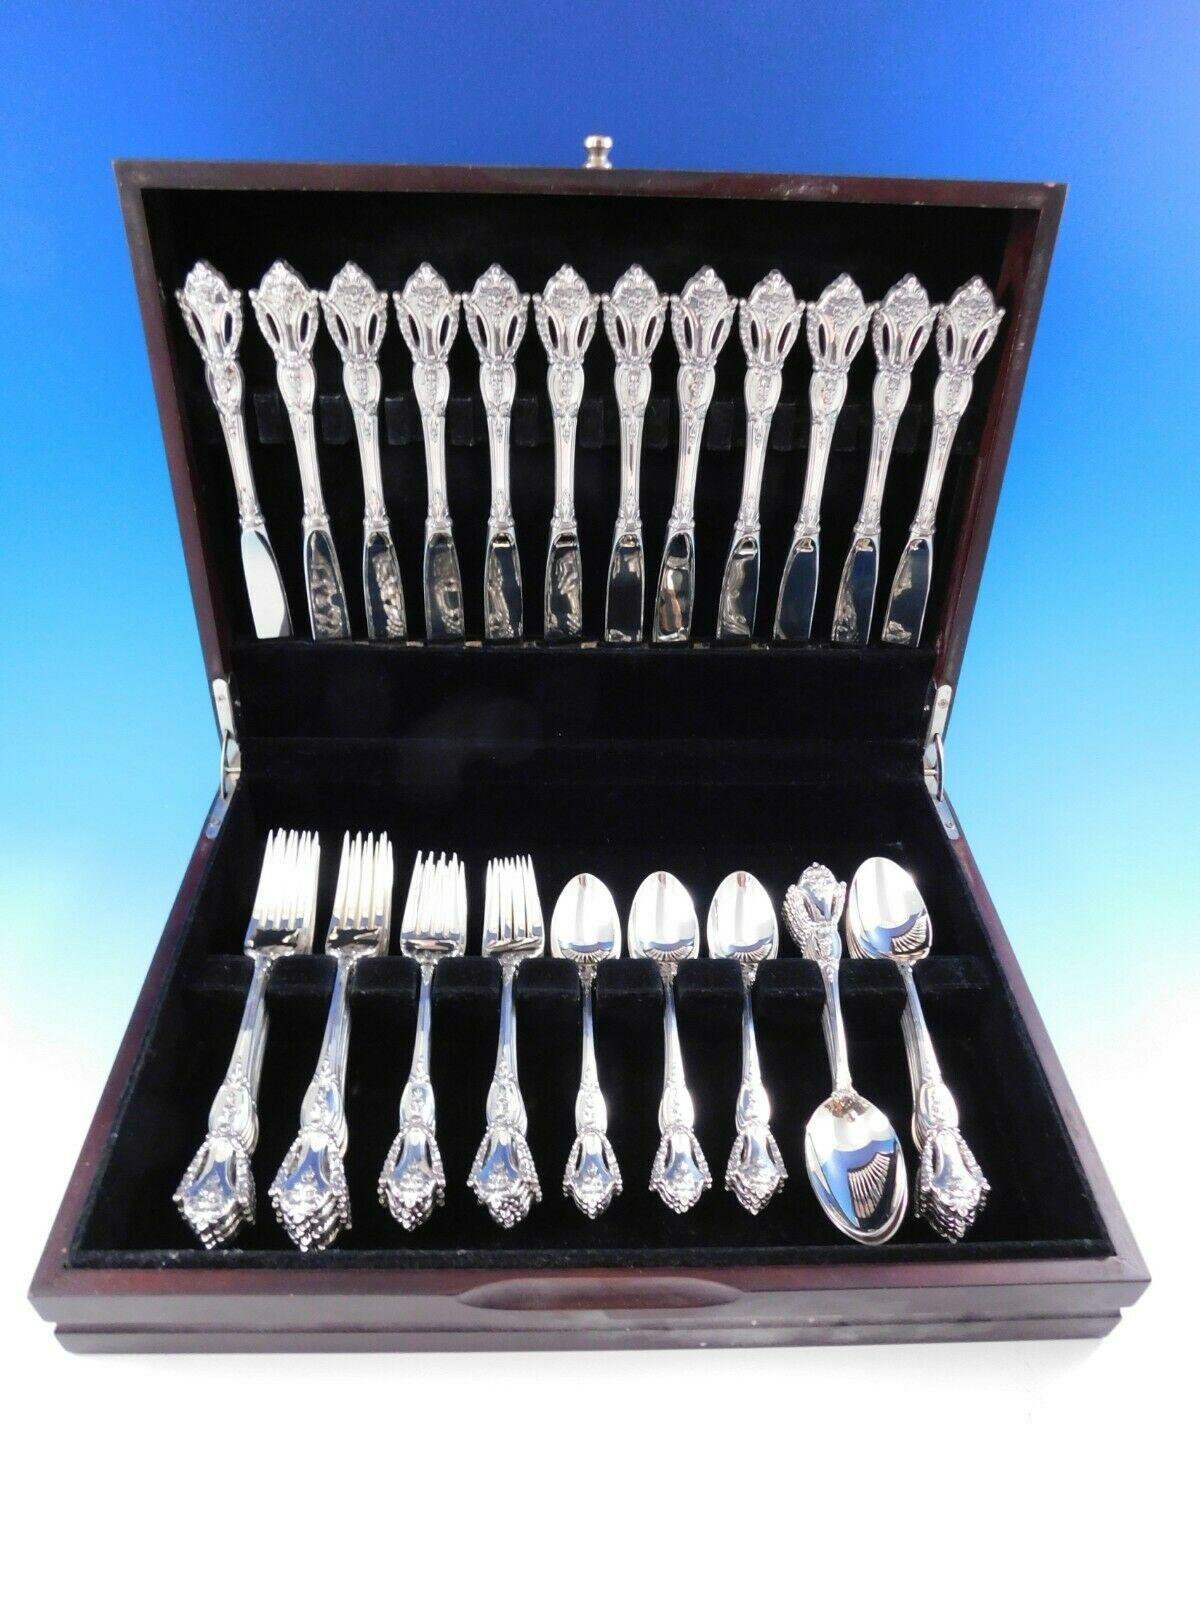 For a table that truly sets you apart, grace every meal with extraordinary sterling silver from Tuttle. 

Heirloom quality Beauvoir by Tuttle sterling silver flatware set, 60 pieces. This set includes:

12 knives, 9